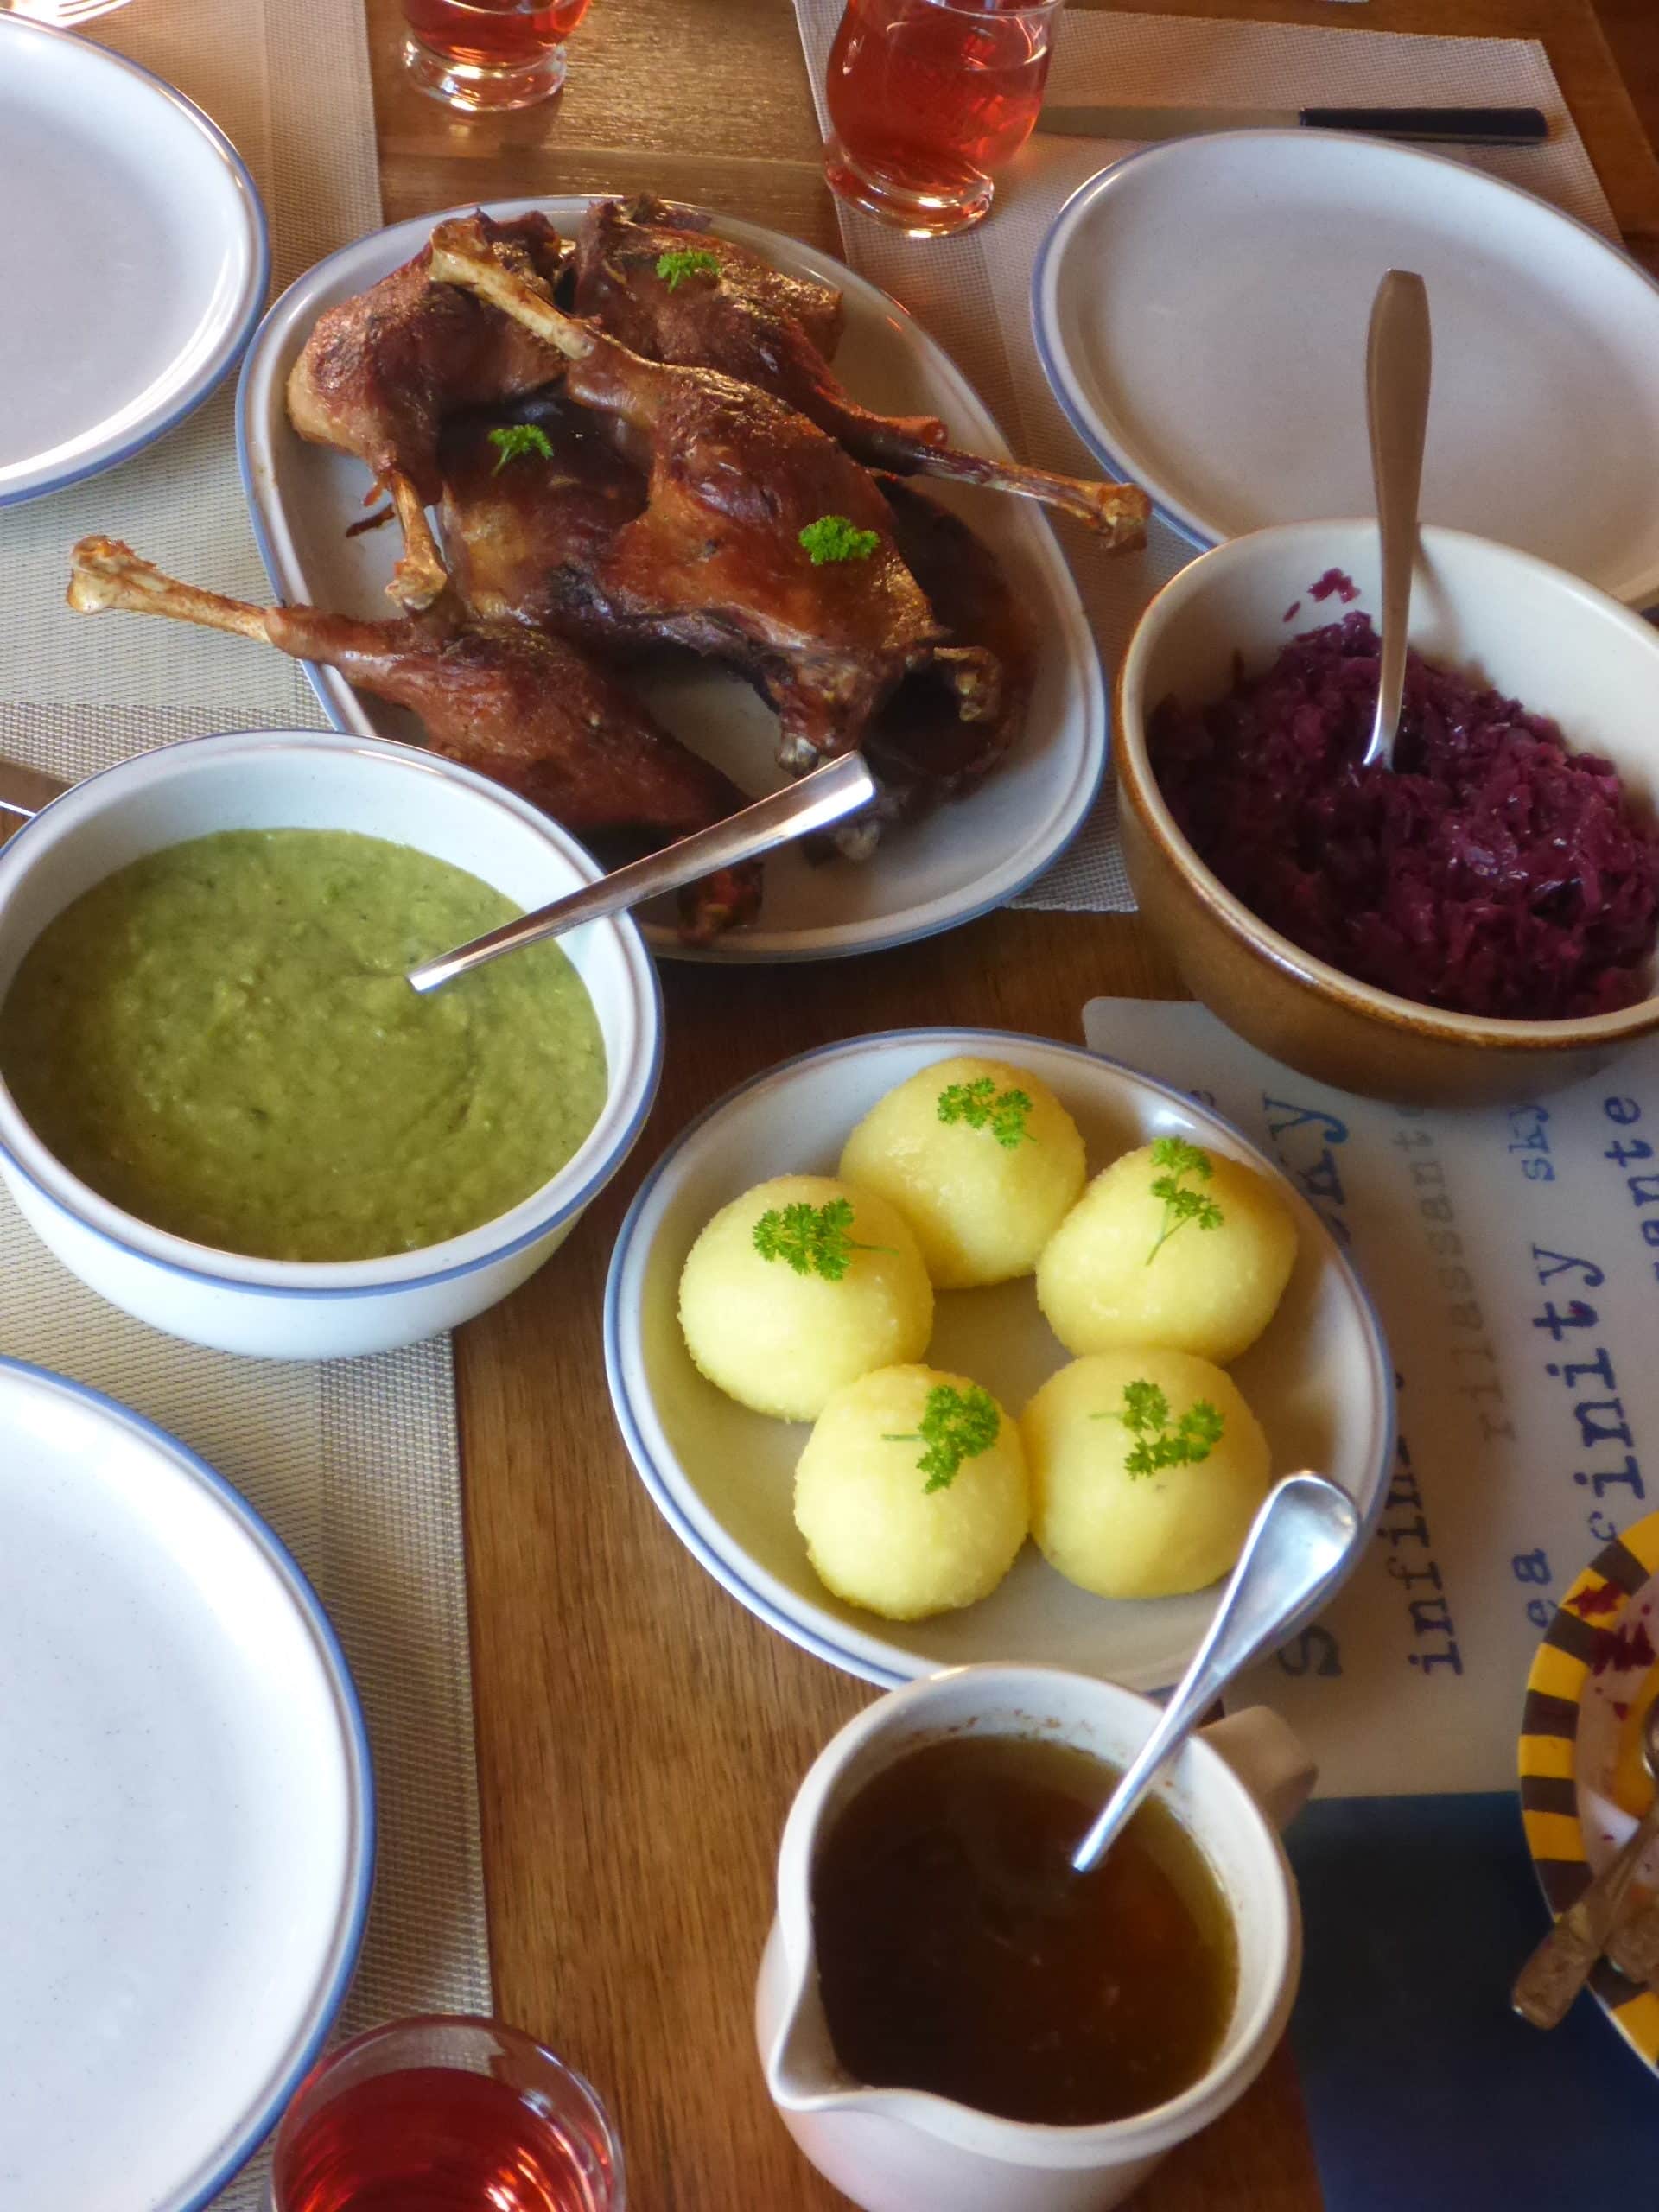 Sunday lunch in Bavaria: A photo featuring perfectly golden brown German roasted goose legs on a platter, accompanied by a plate of potato dumplings, a bowl of savoy cabbage (Wirsing), gravy,  and a bowl of blaukraut, all elegantly served on a dining table.